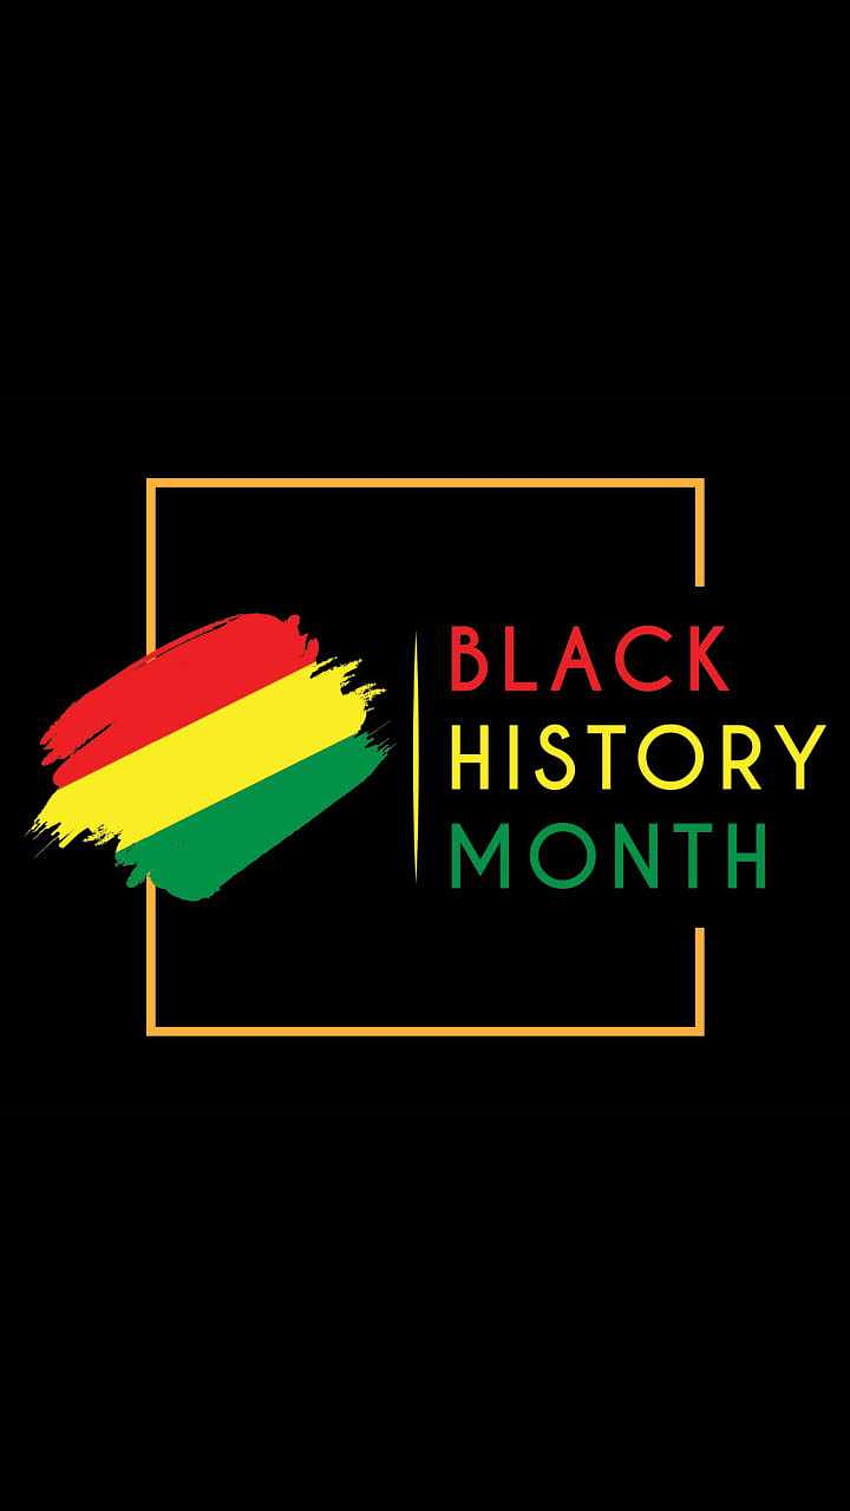 Black History Month Images Browse 22835 Stock Photos  Vectors Free  Download with Trial  Shutterstock